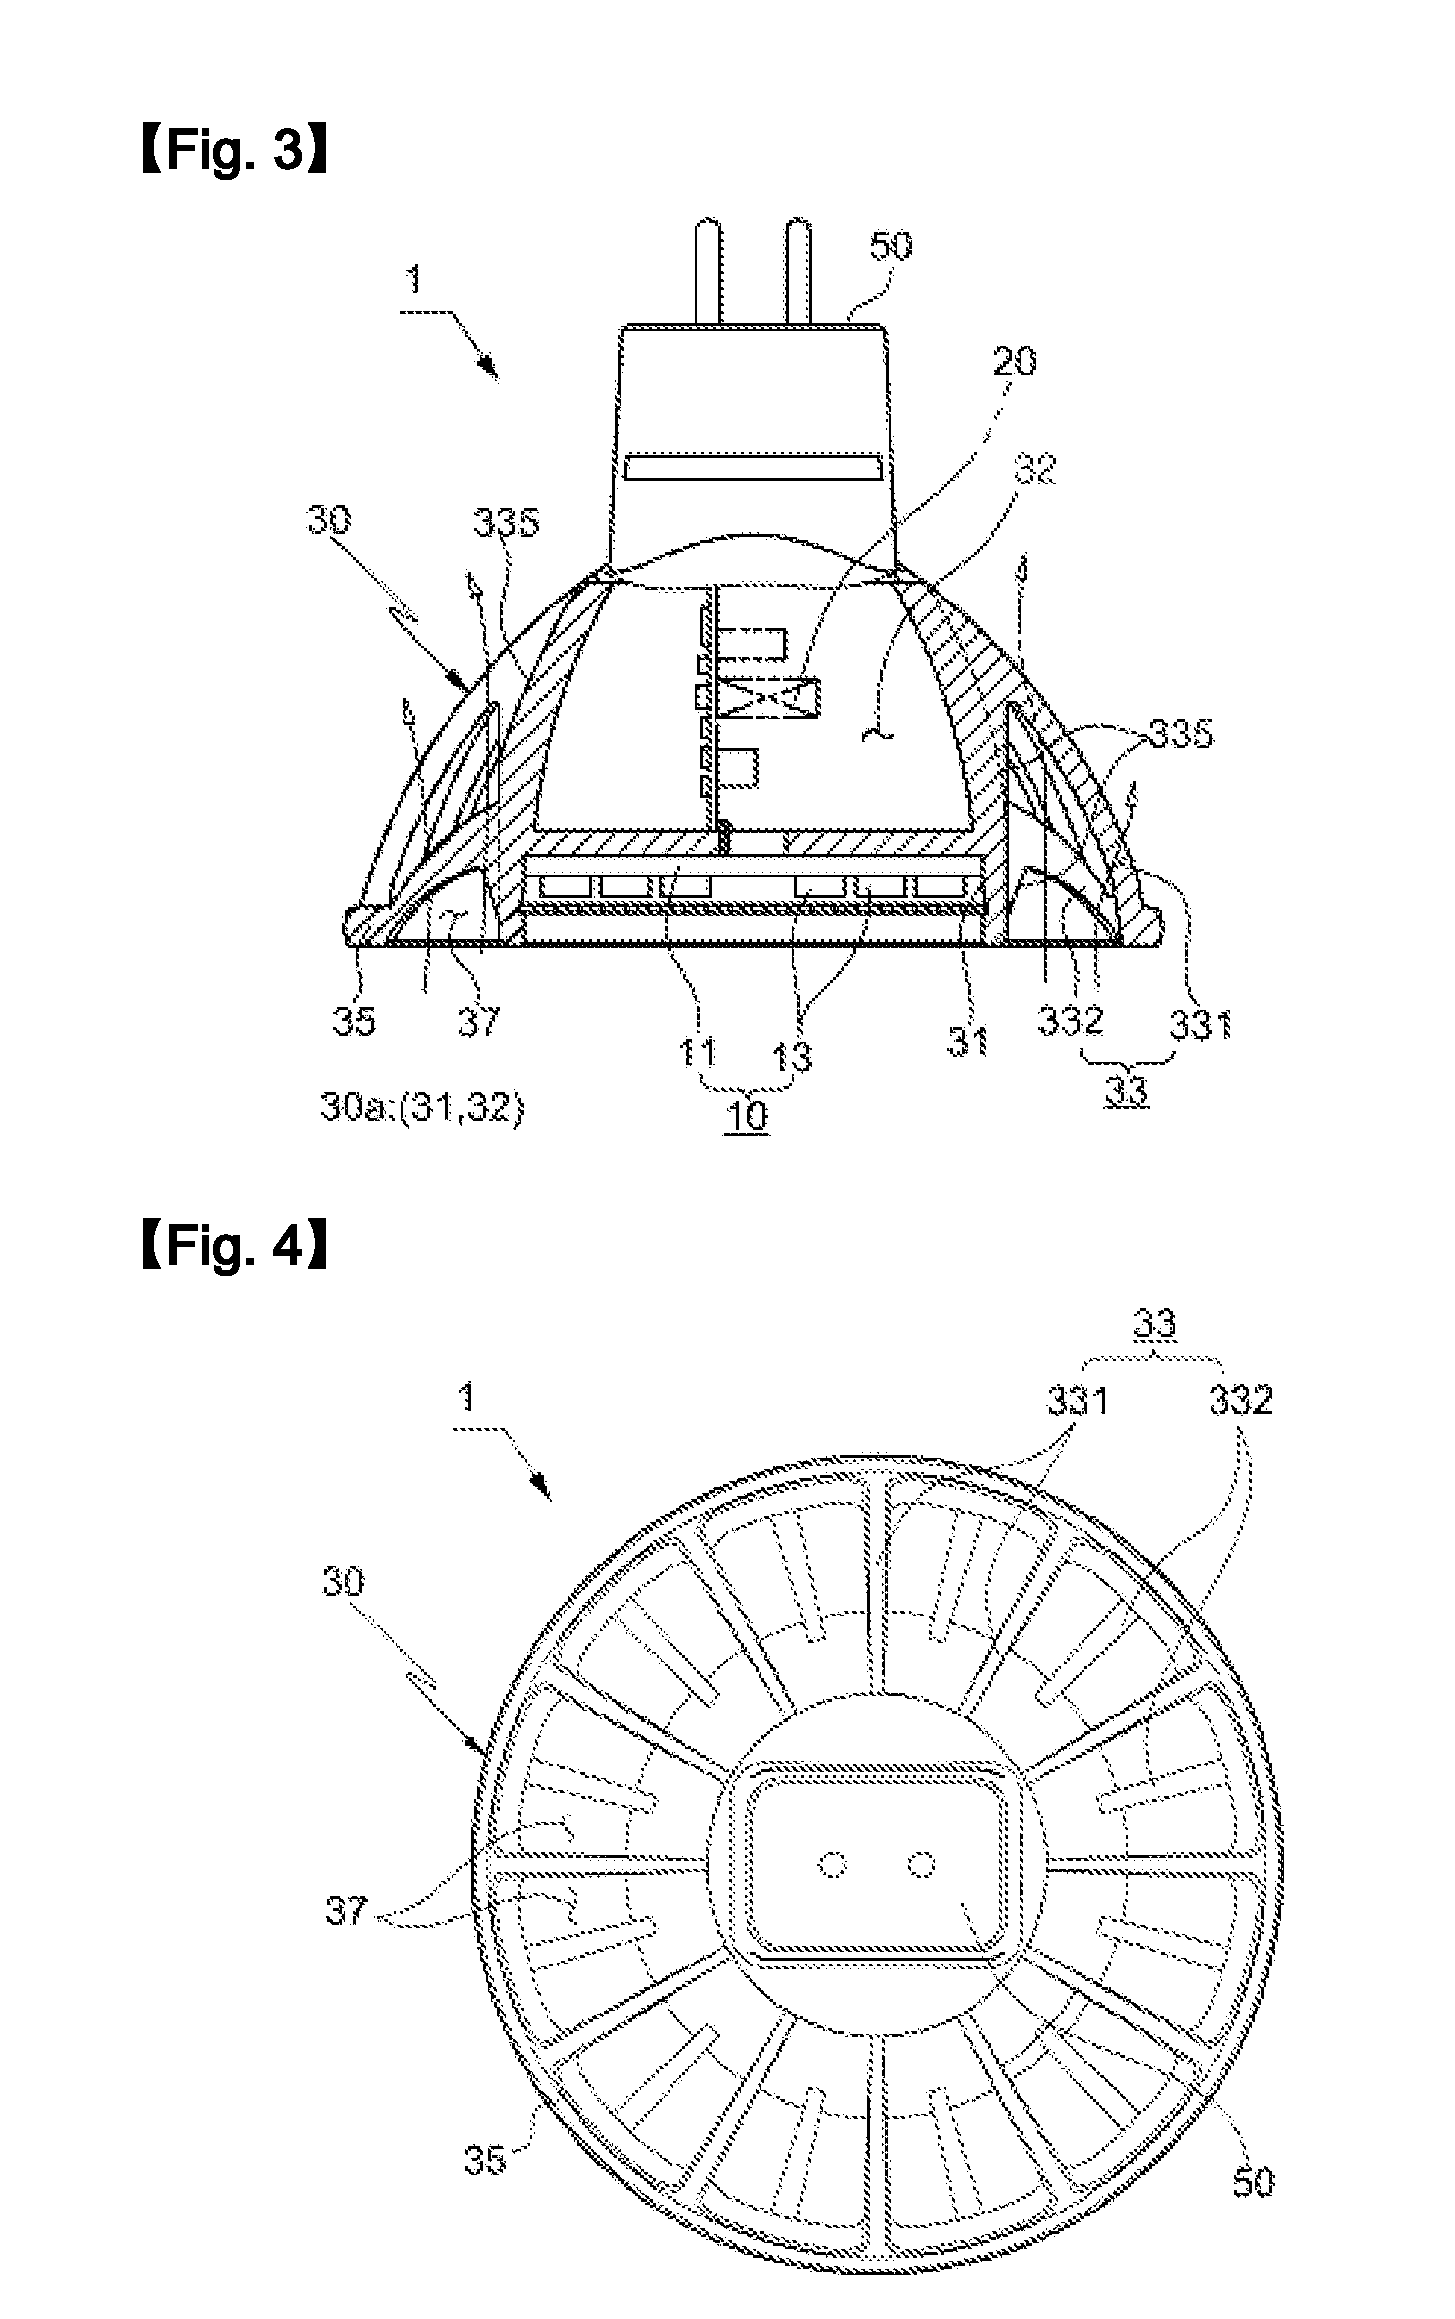 LED lighting apparatus to dissipate heat by fanless ventilation